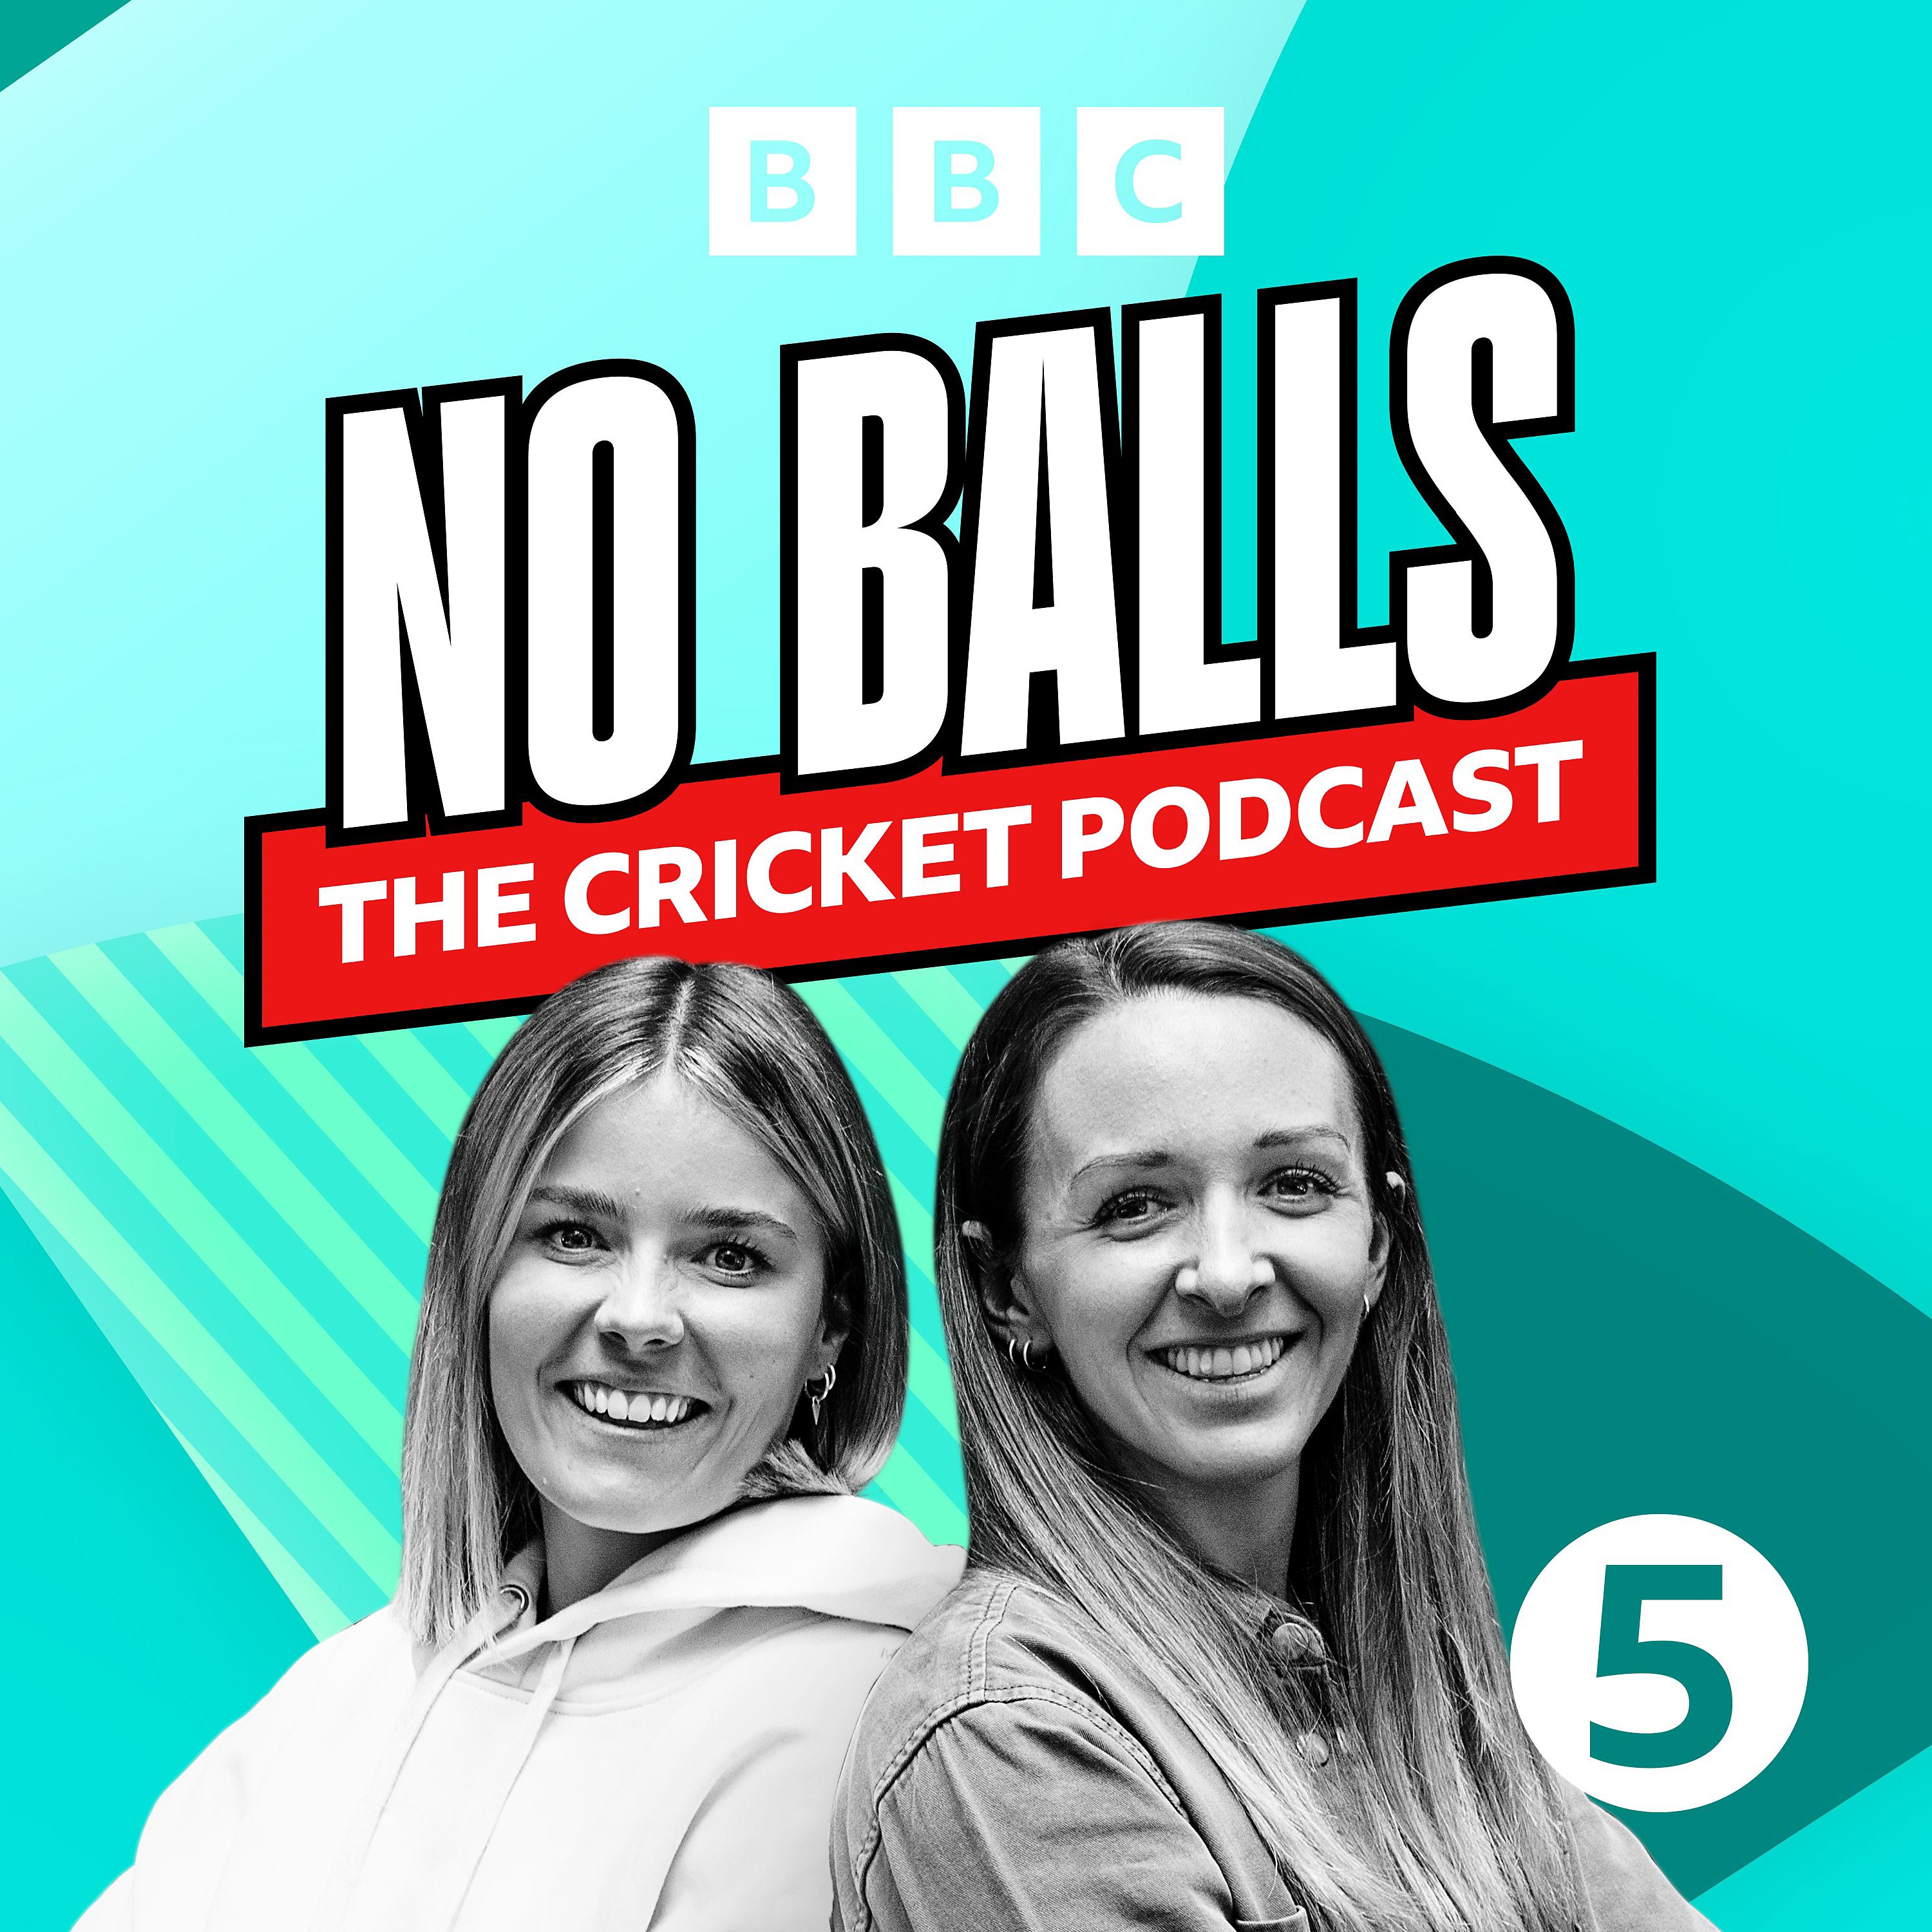 No Balls: The Cricket Podcast - England win in India and Alex hits the slopes!